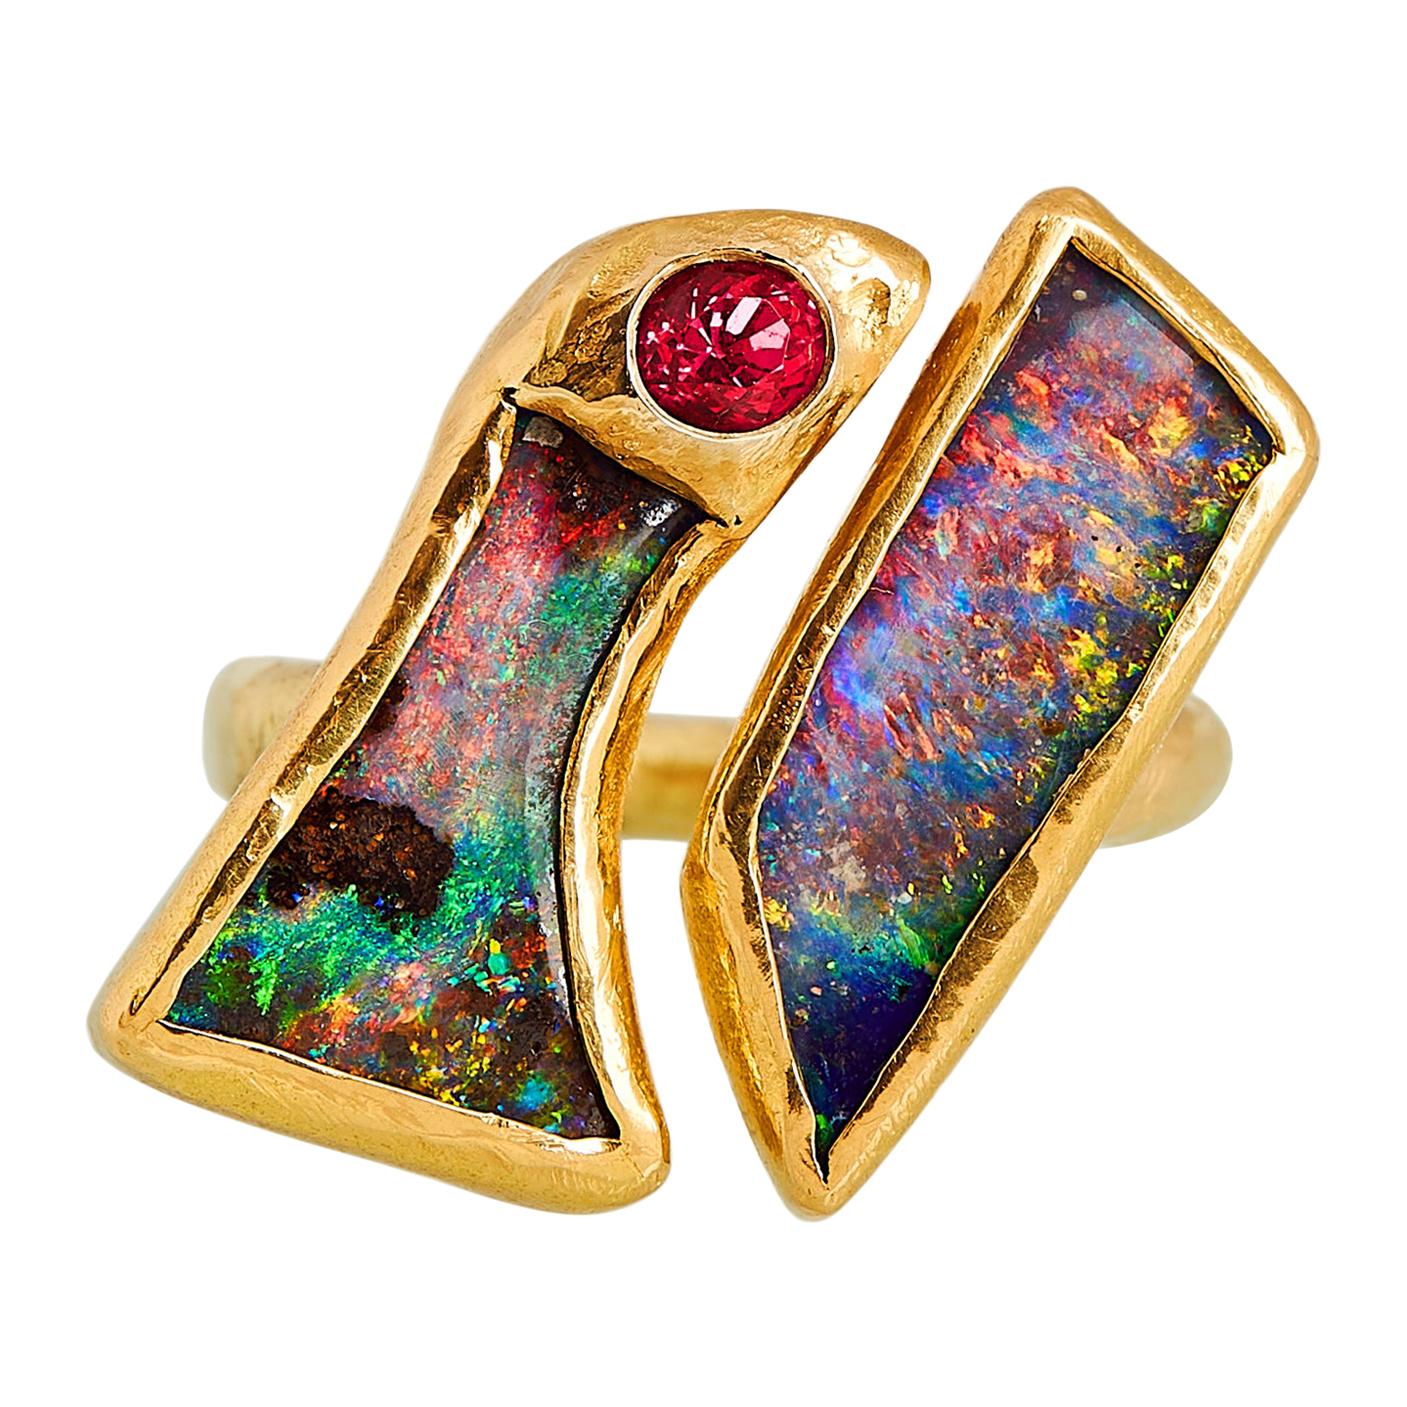 Double Opal Ring in Solid 22 and 18 Yellow Karat Gold with Spinel